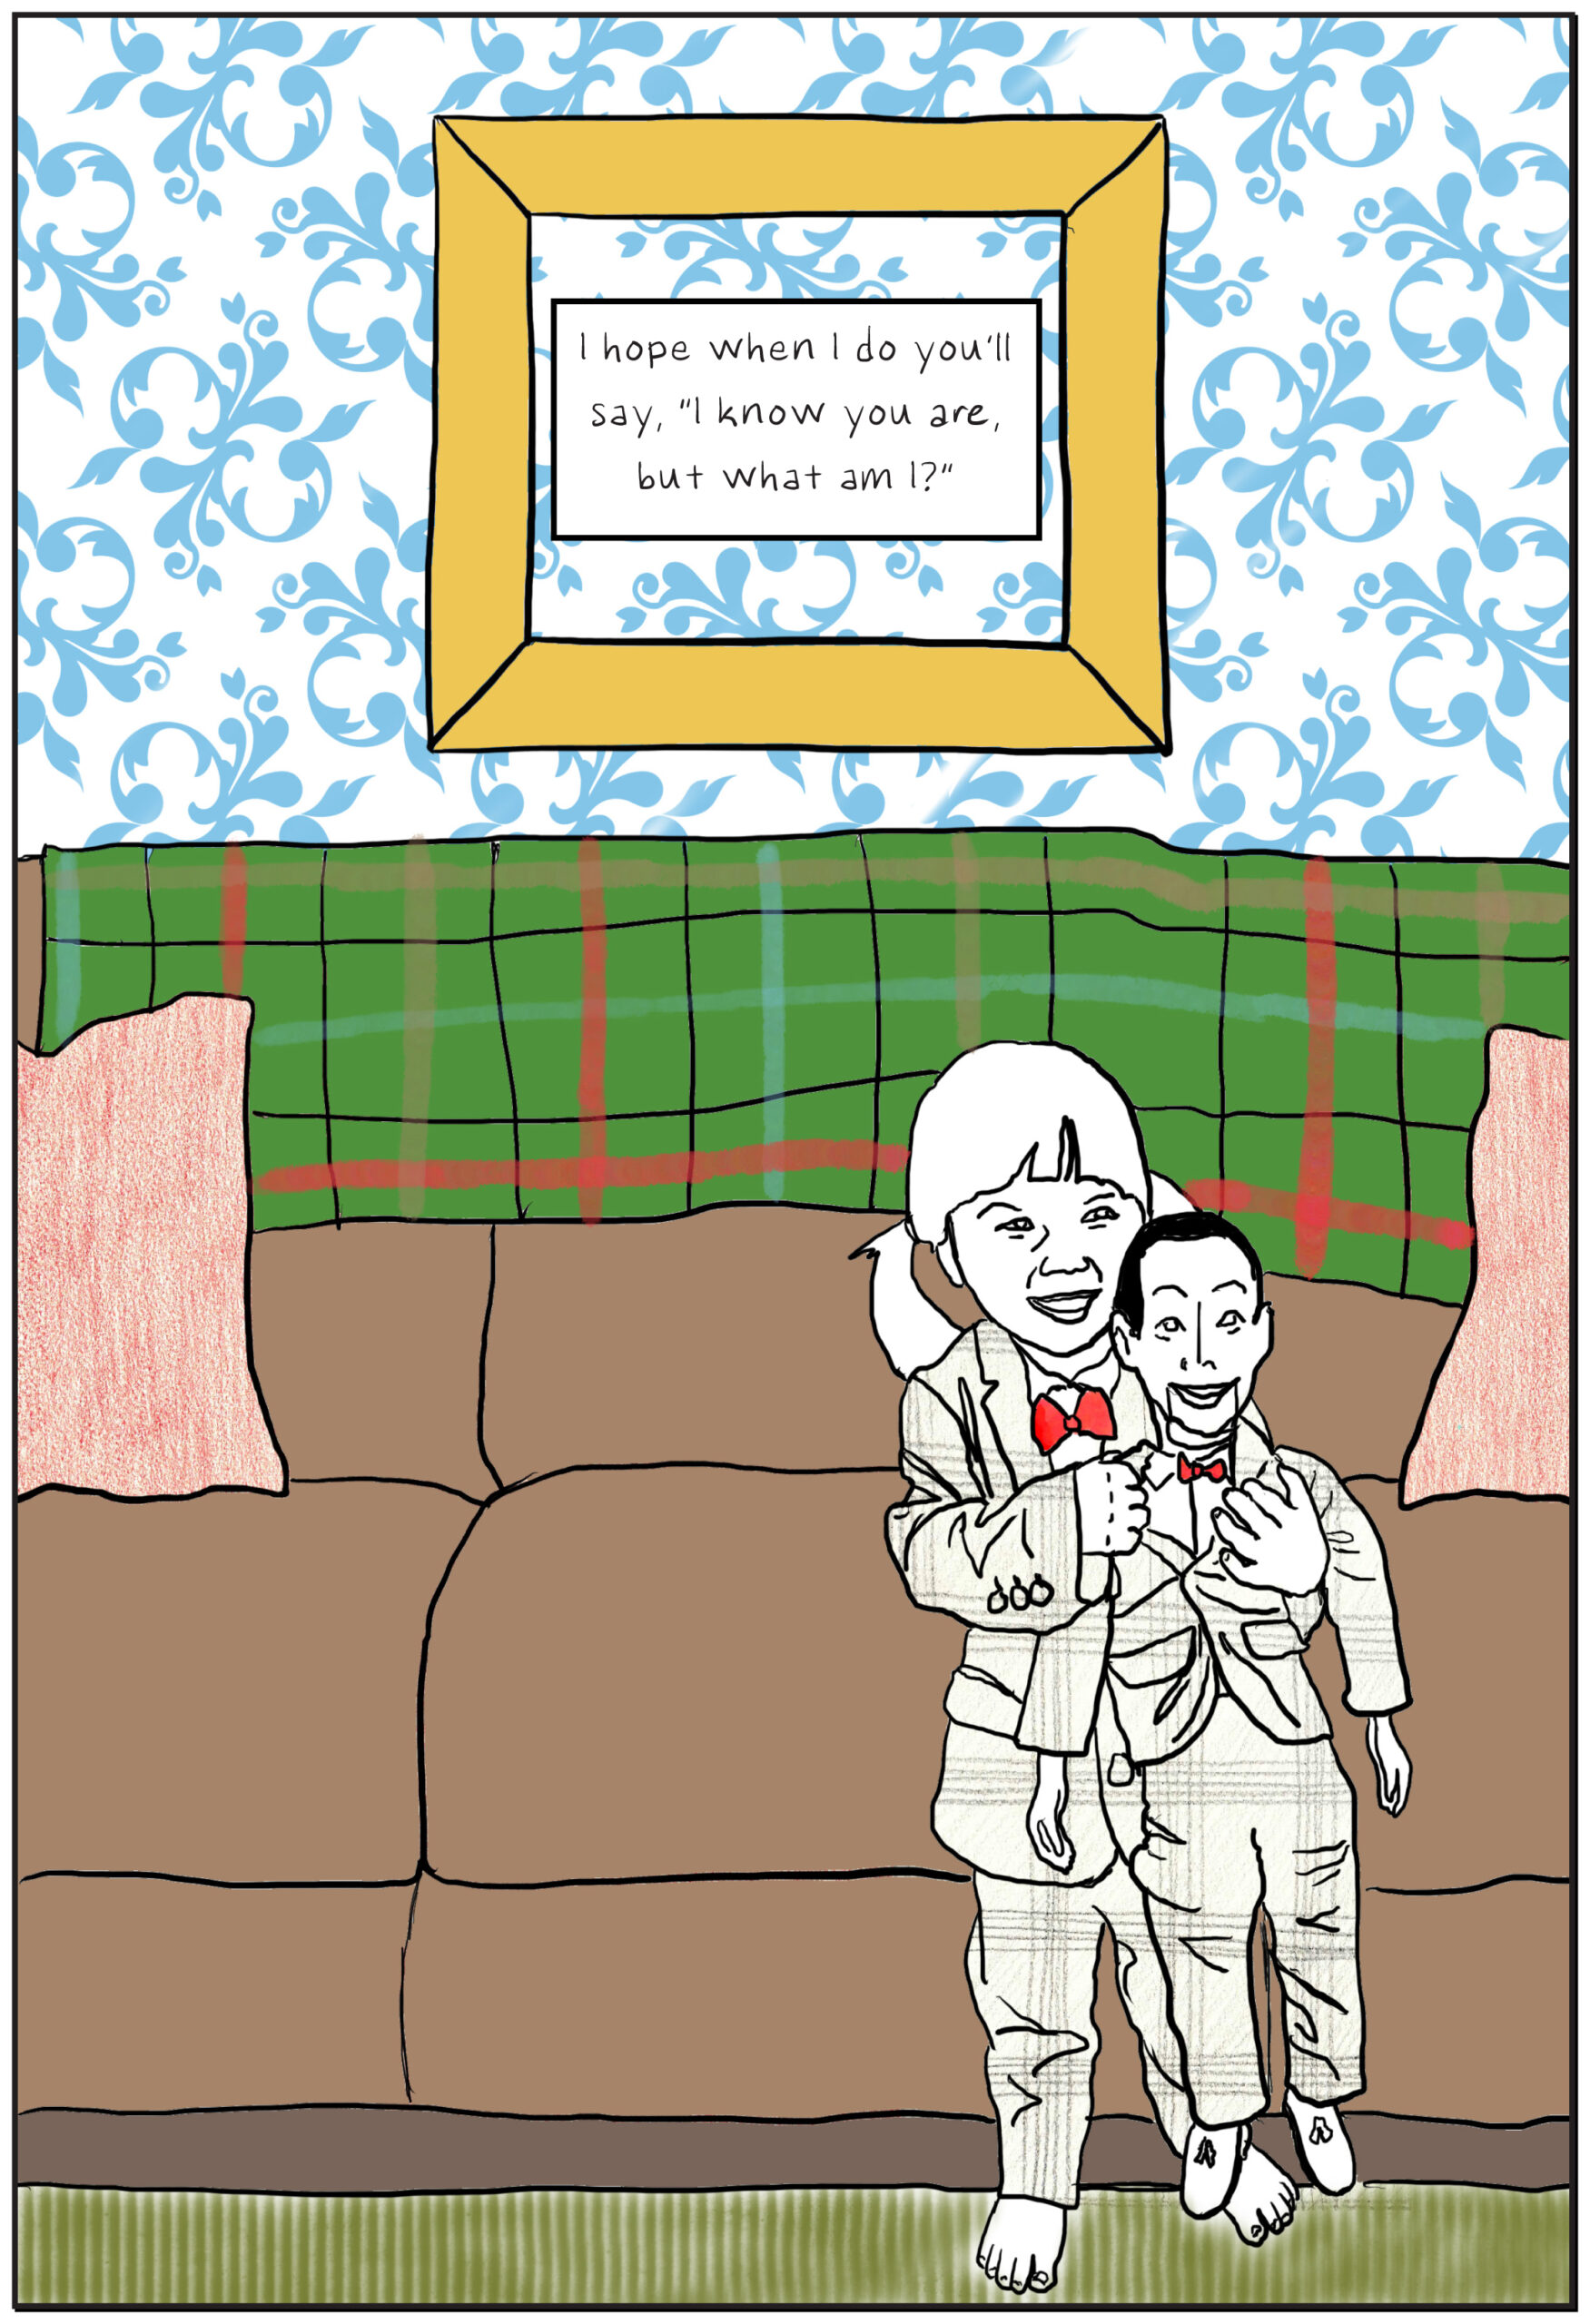 A three-year-old child in pigtails stands in a suburban living room clutching on to a Pee-wee Herman doll. The child and doll wearing matching glen plaid suits with red bowties. The whole scene is rendered in vibrant color. Text: I hope when I do you’ll say, “I know you are, but what am I?”